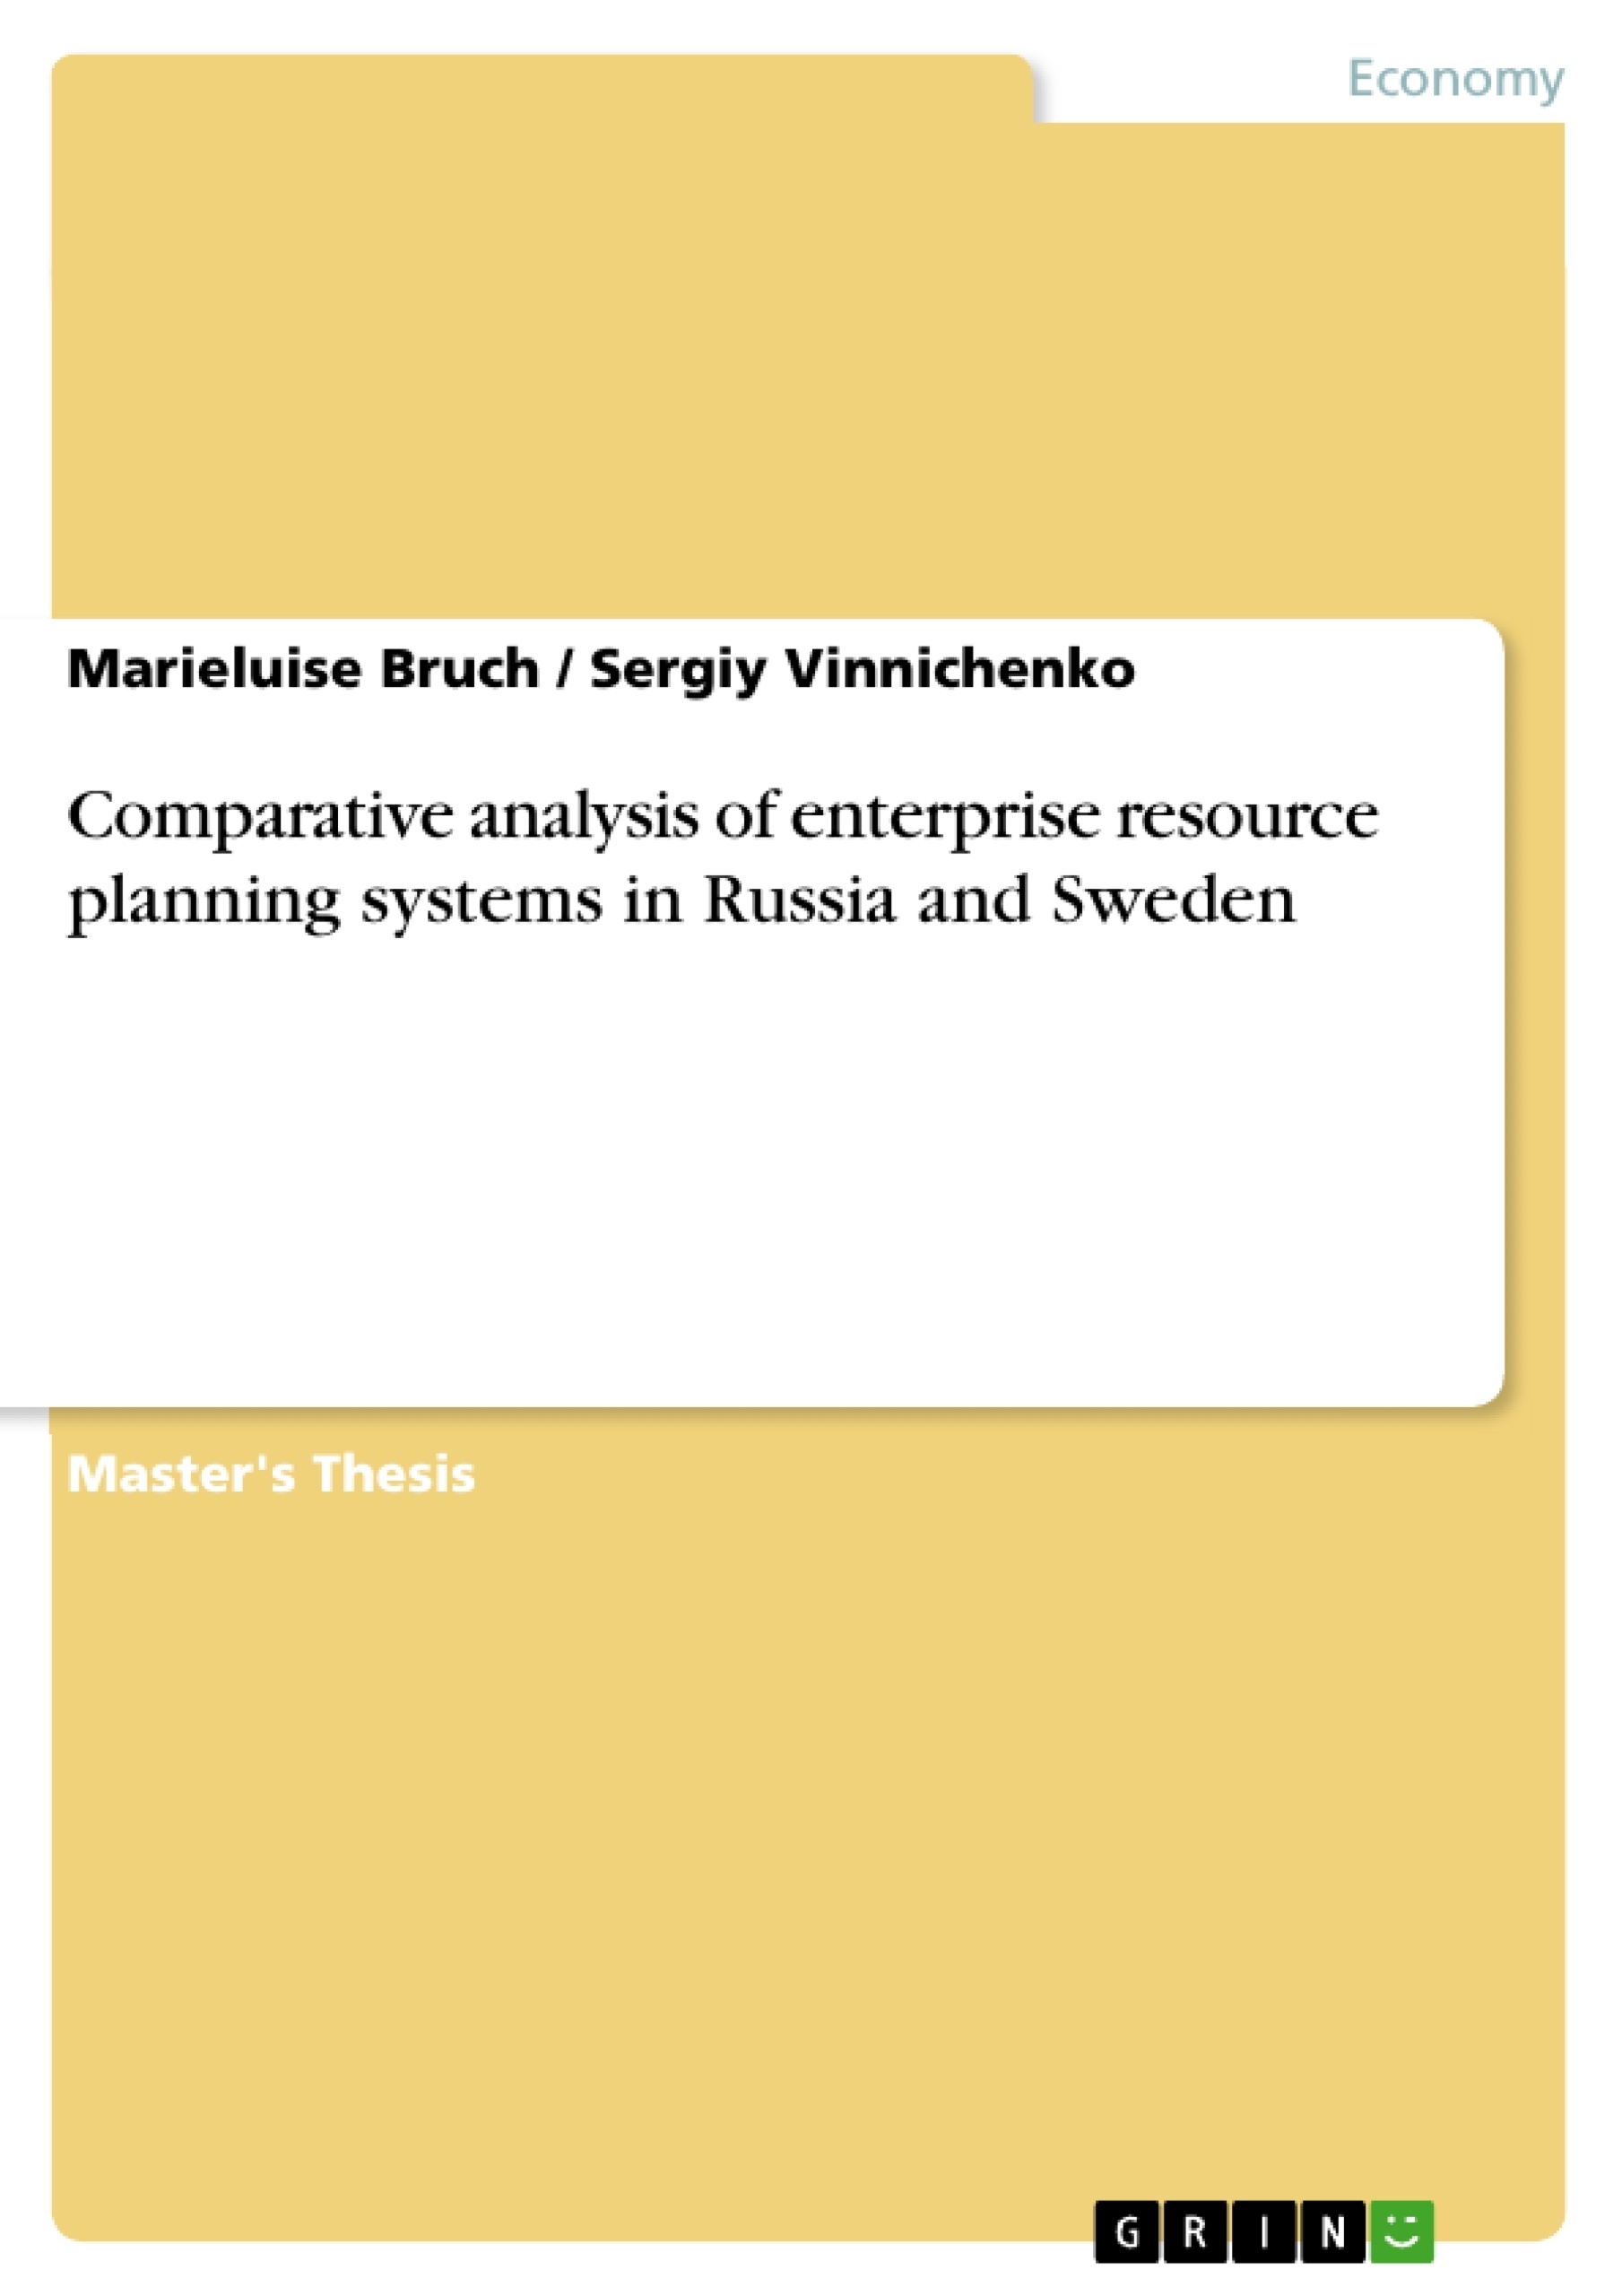 Titre: Comparative analysis of enterprise resource planning systems in Russia and Sweden